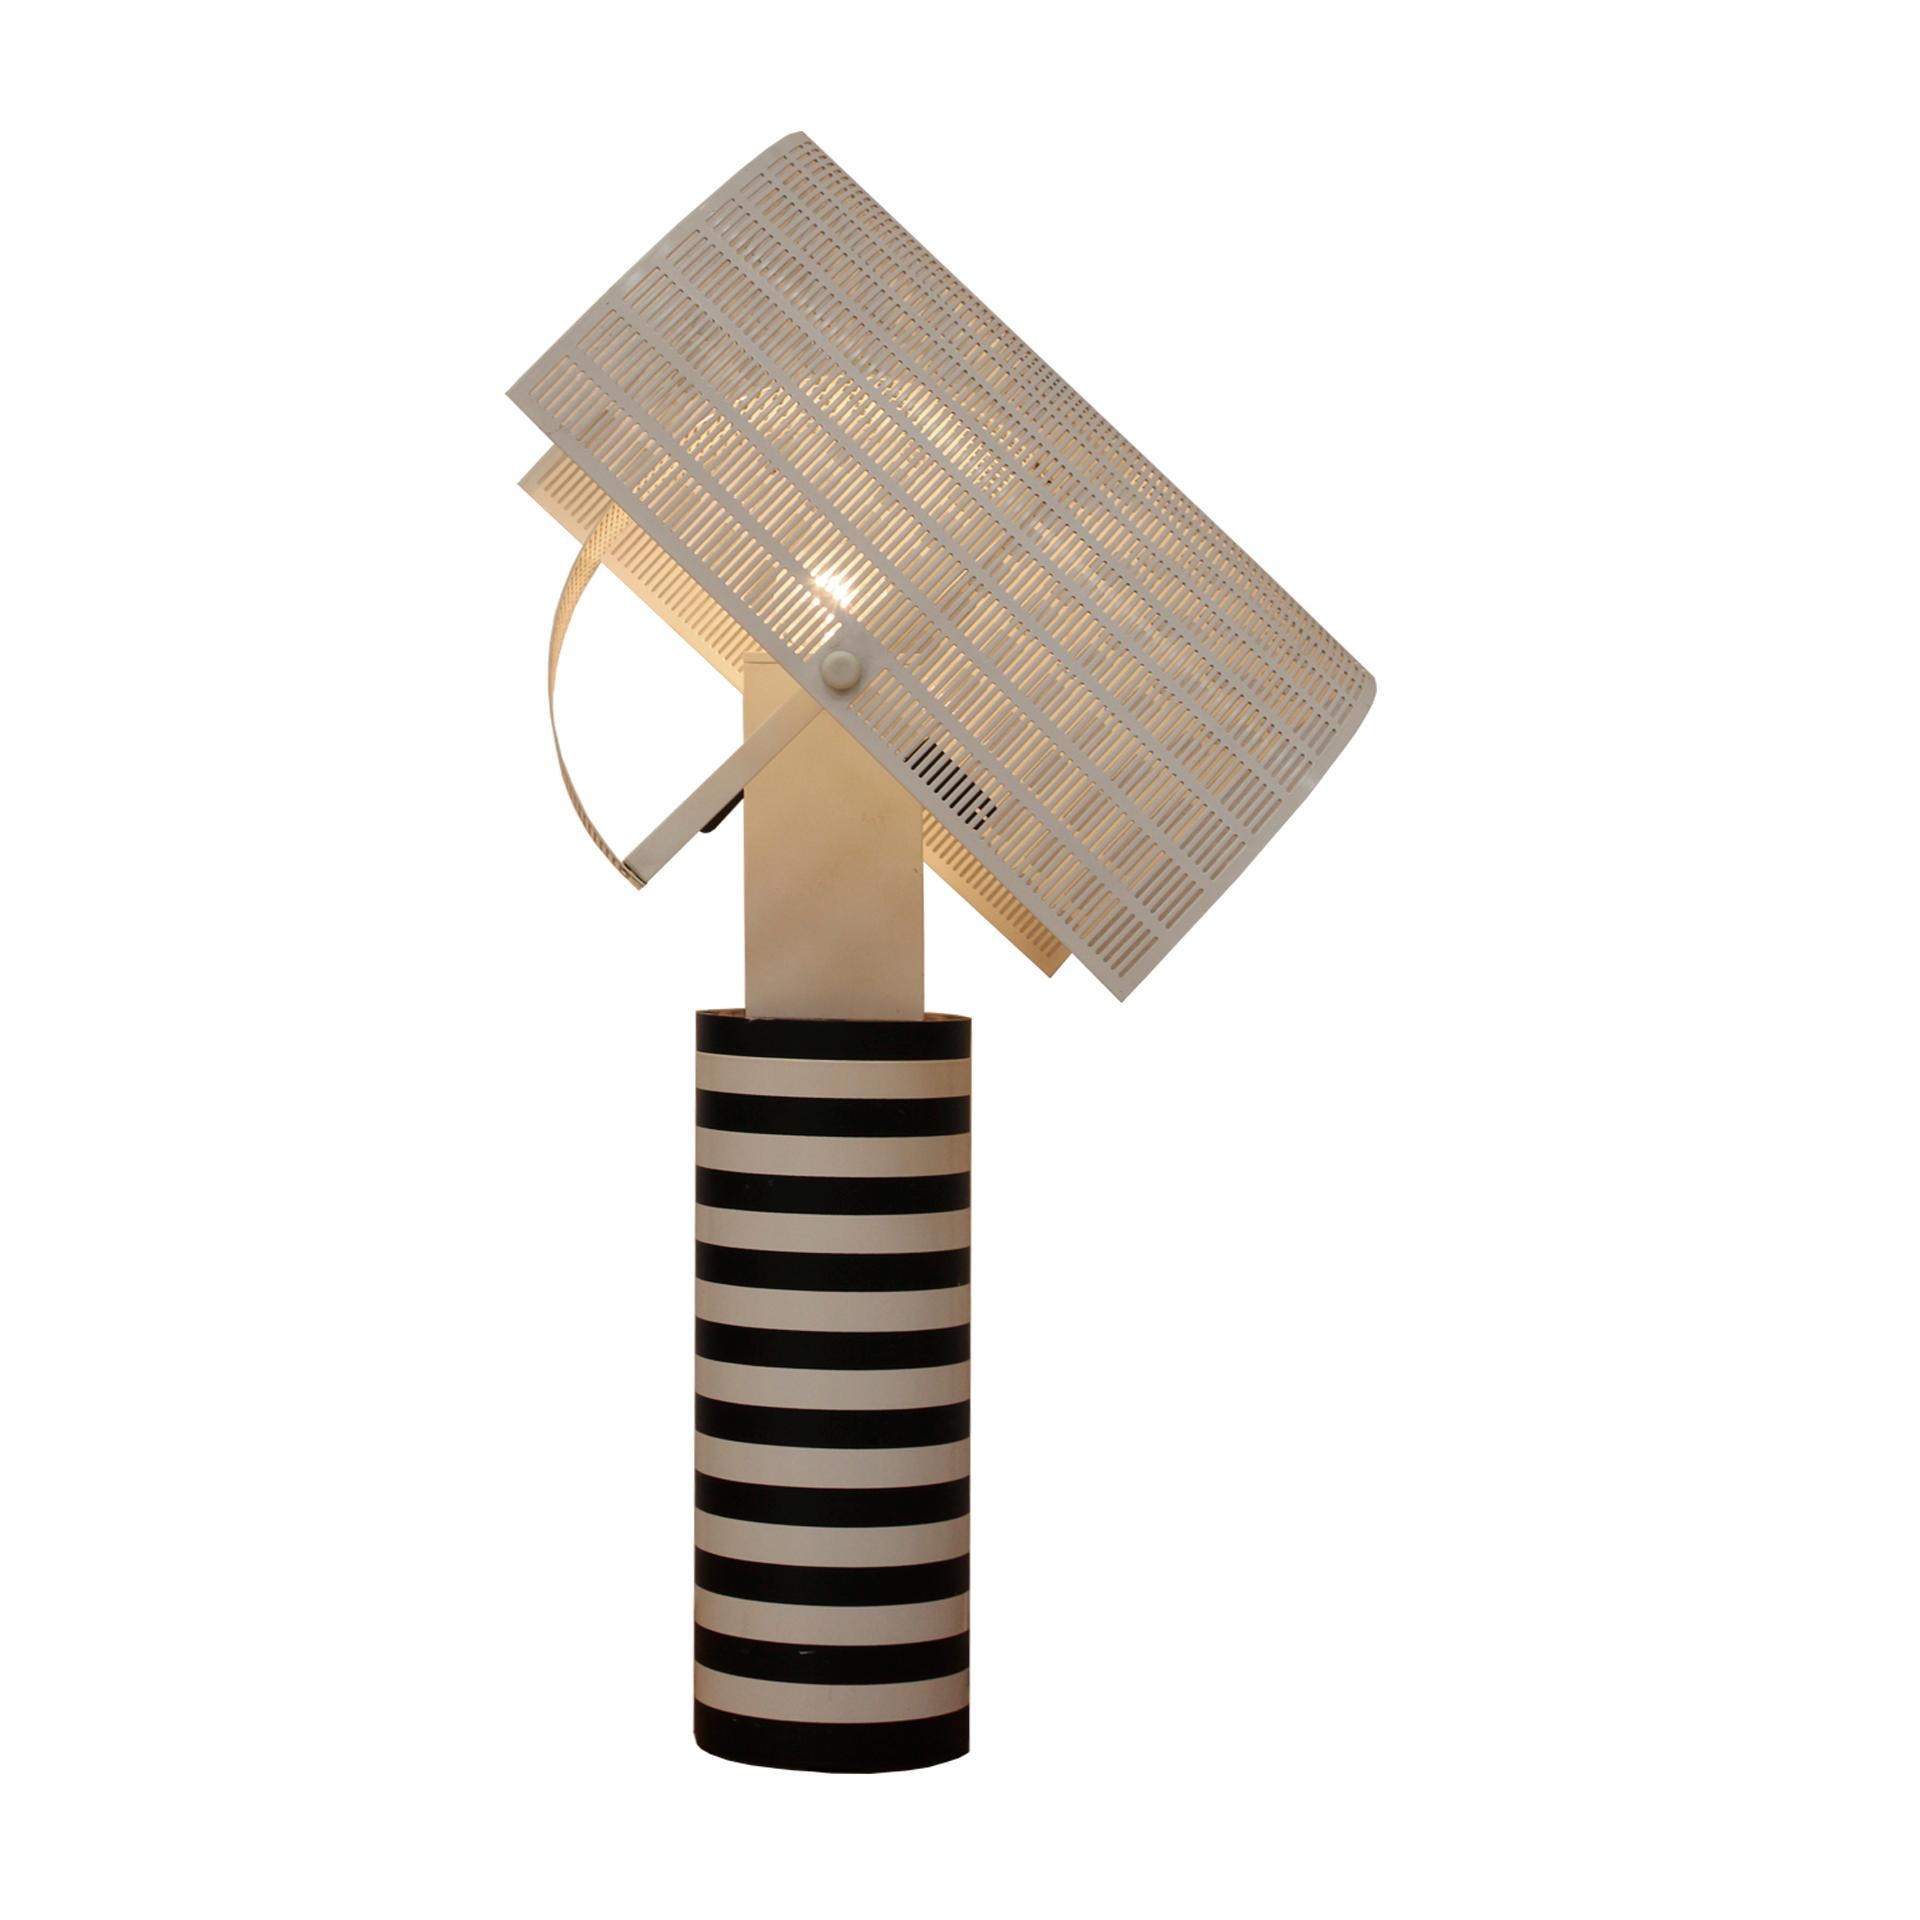 Table lamp mod Shogun designed by Mario Botta for Artemide. Made of steel and aluminun. Adjustable lamp top made of perforated metal sheet. Italy 1980s.

The lamp features a distinct cylindrical shape, meticulously crafted with precise angles and